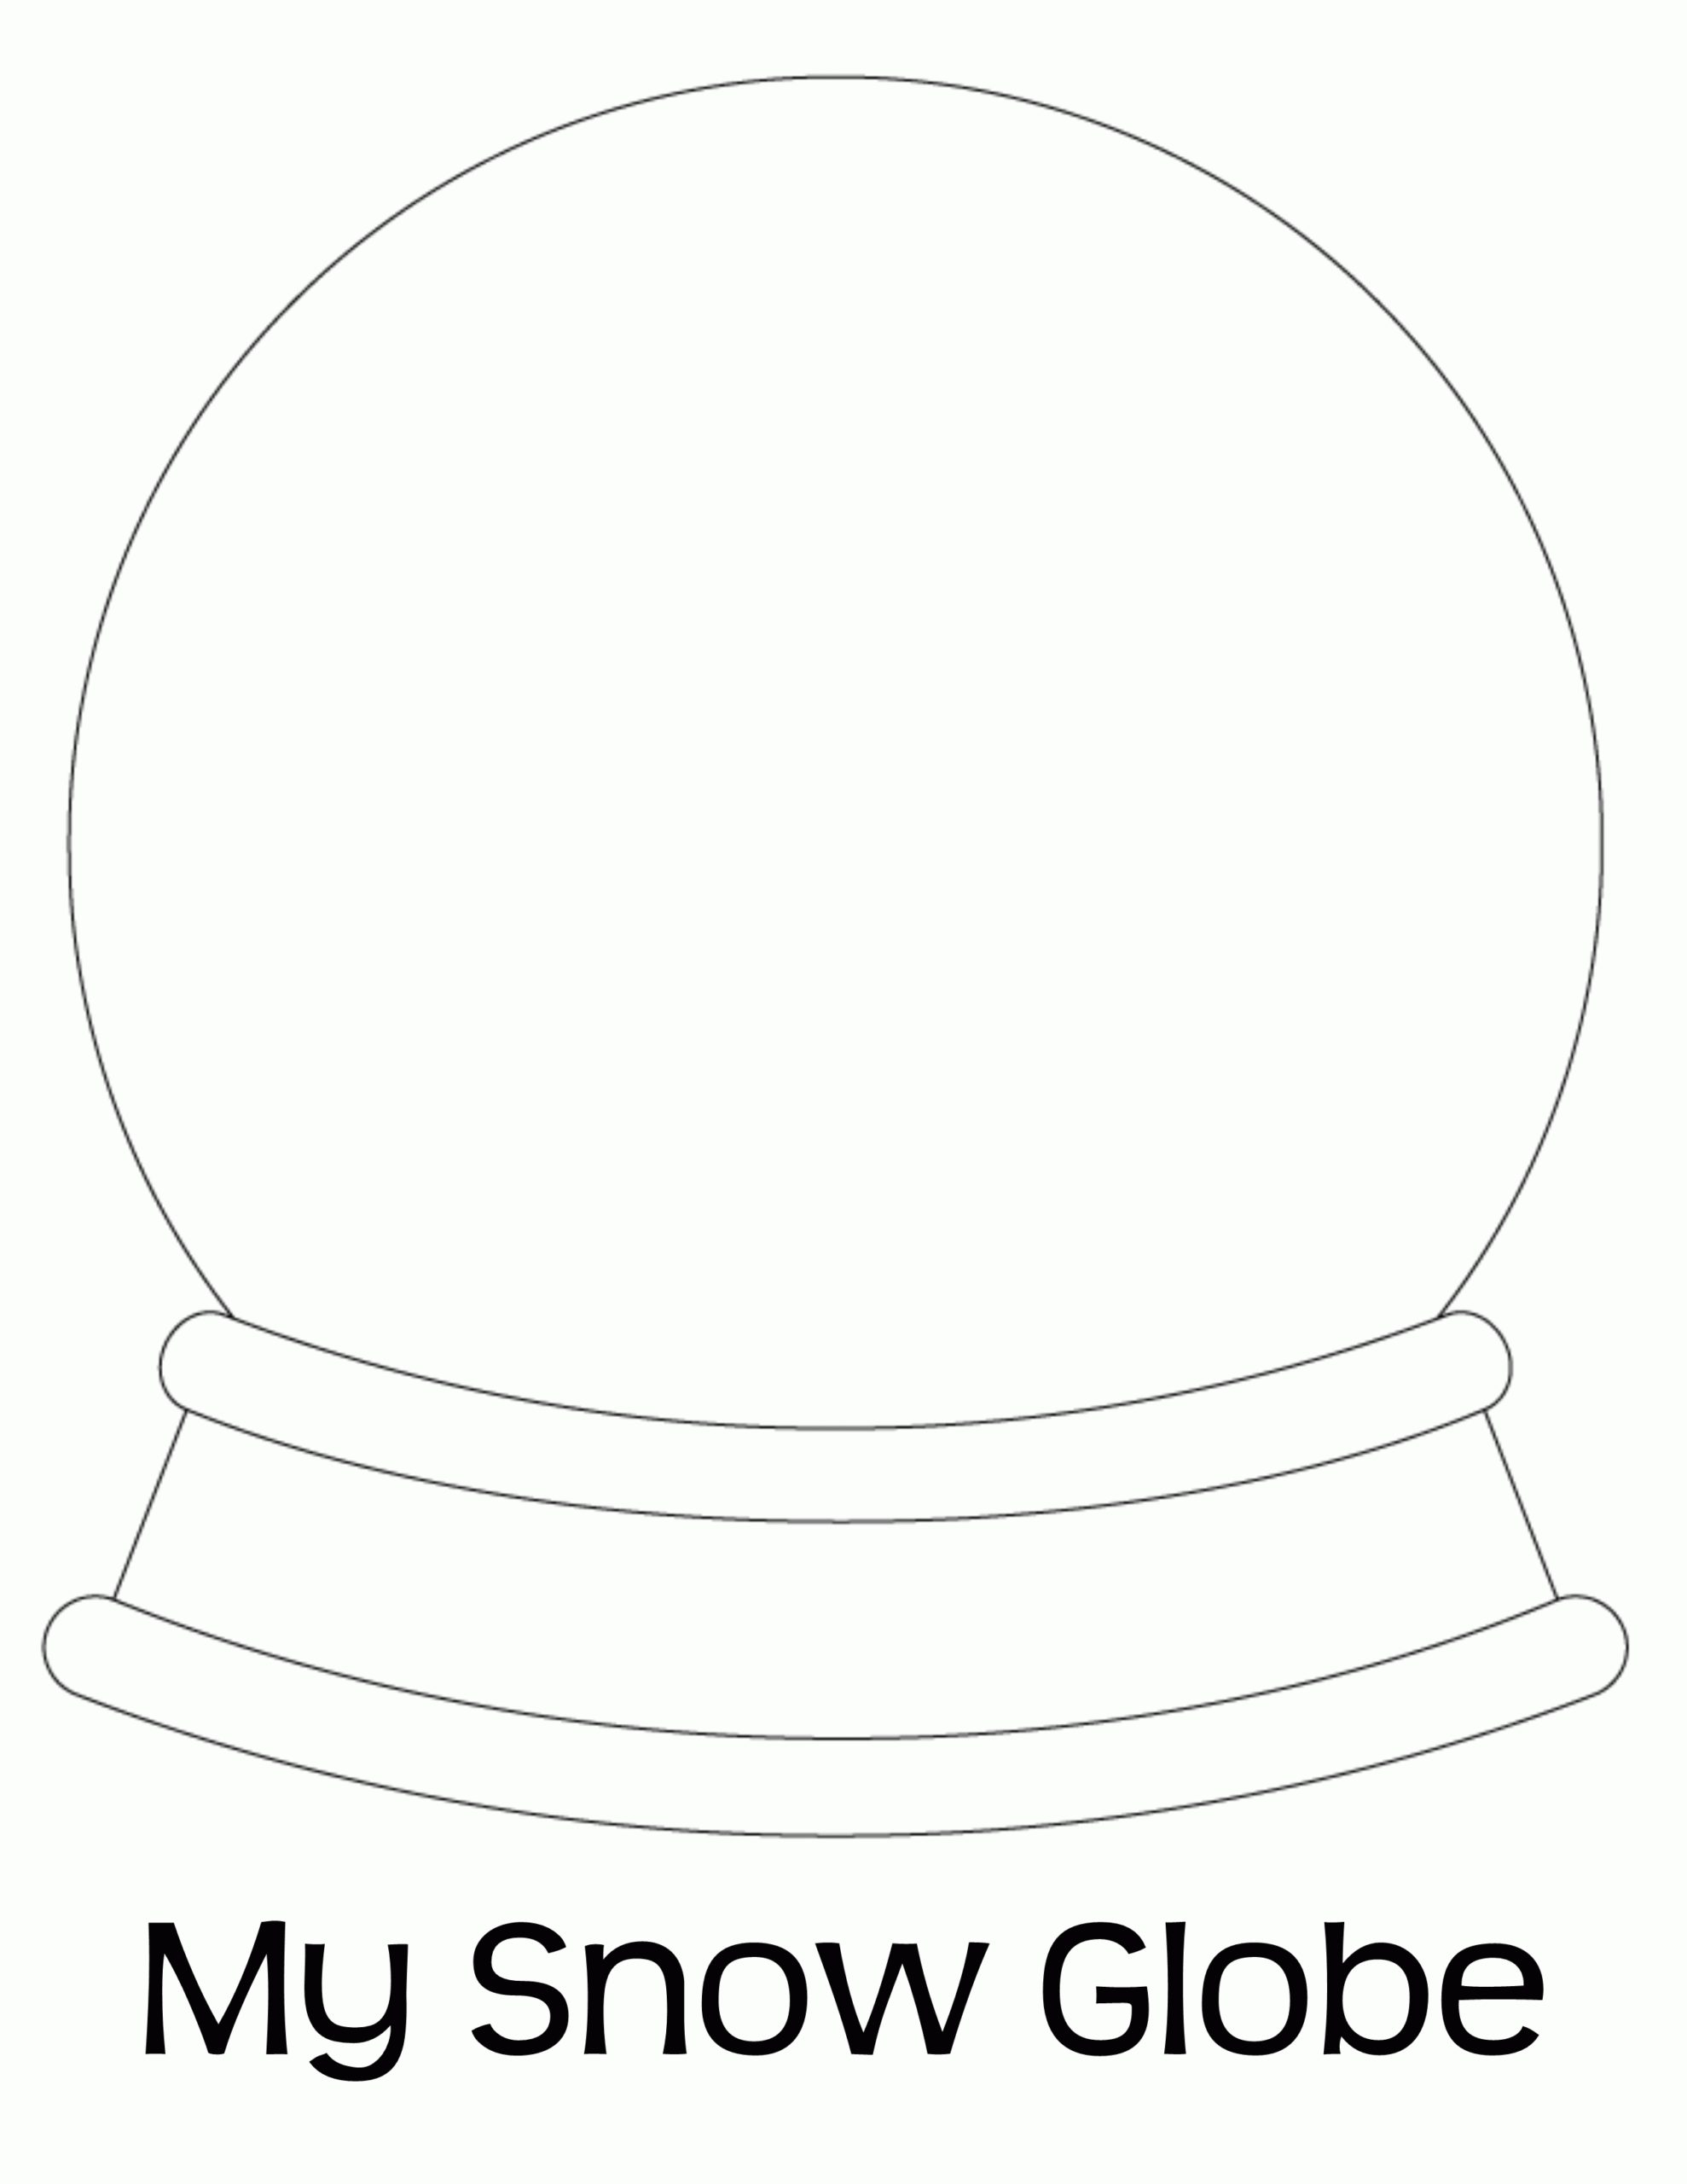 Coloring Page Most Brilliant Blank Snow Globe Coloring Page Print